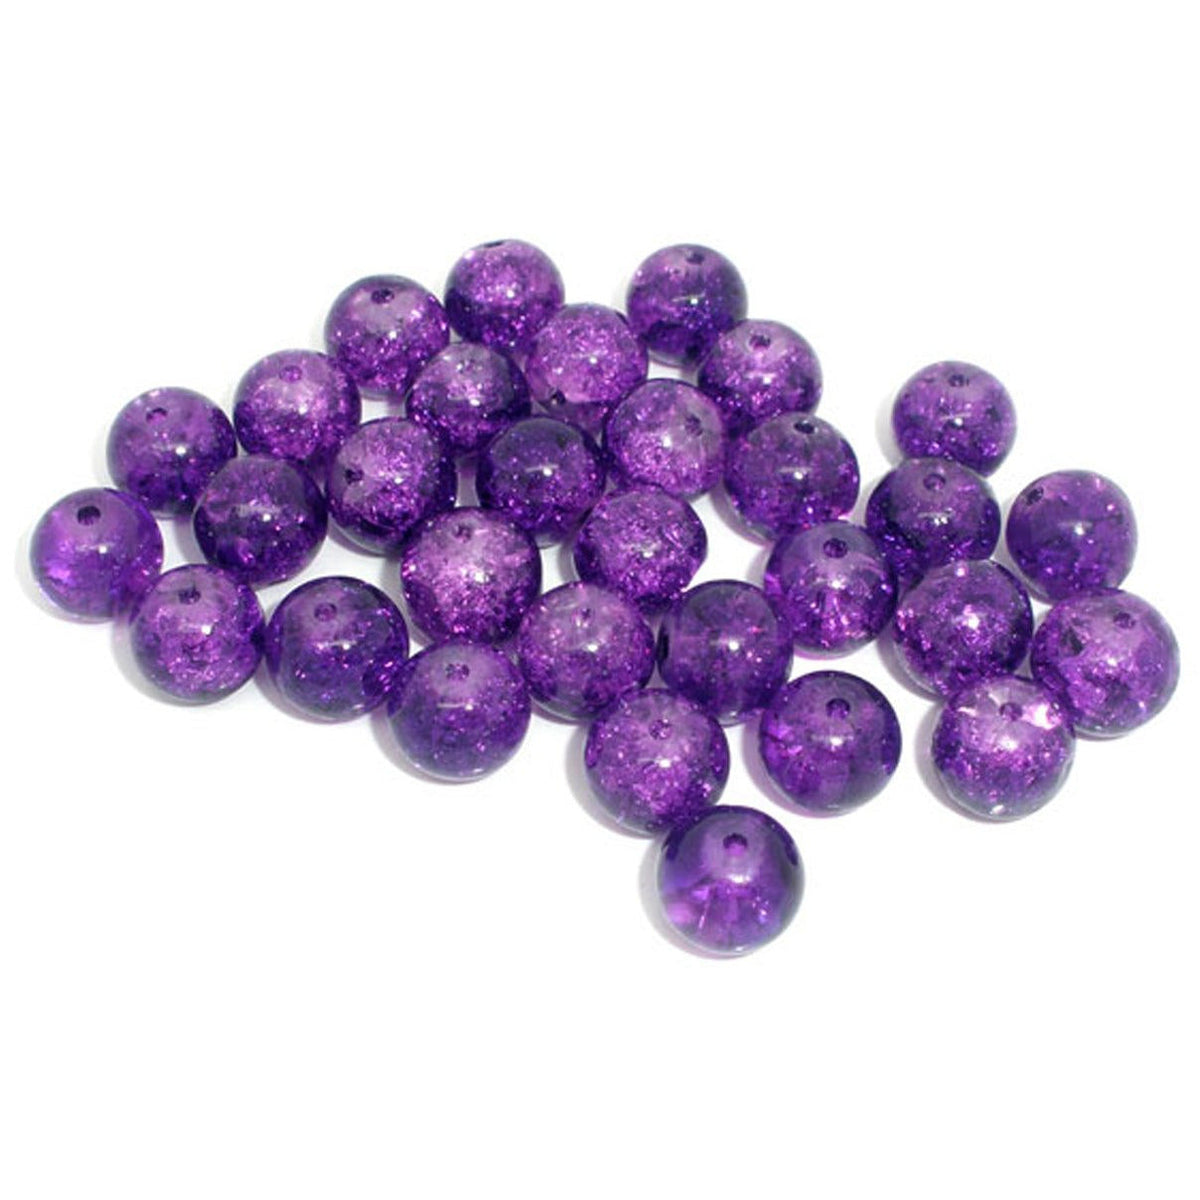 10x Crackle Glass Beads, 8mm Marbles Cracked Glass Beads, Purple Crackled  Glass Beads, Spacer Beads, Beading Supplies B134 